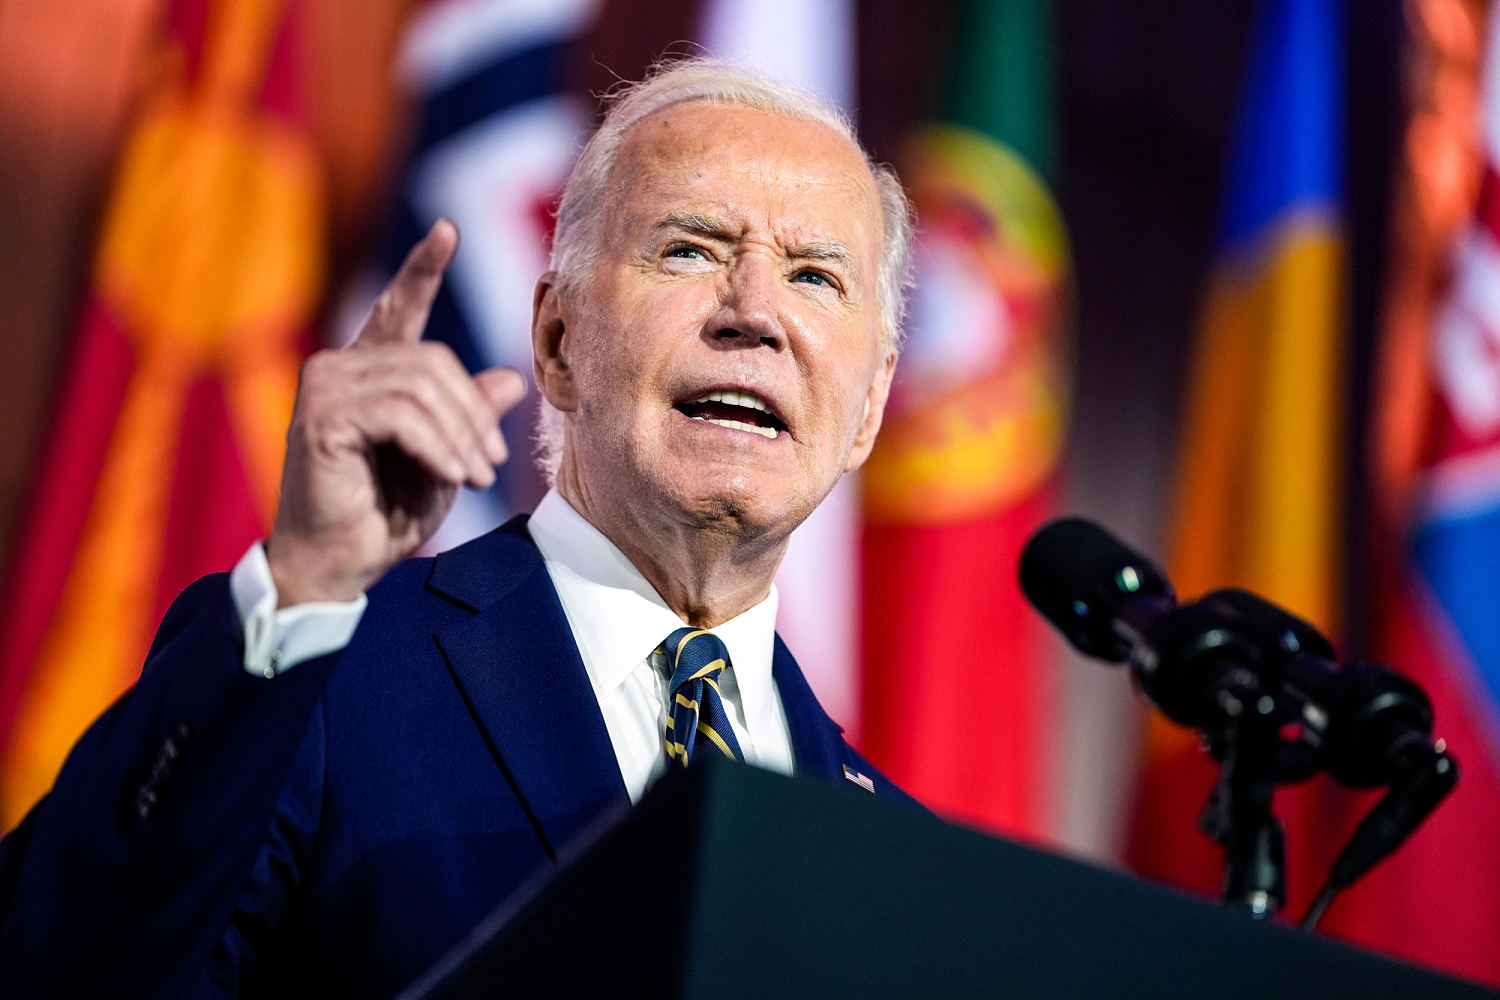 'It's already disastrous': Biden campaign fundraising takes a major hit